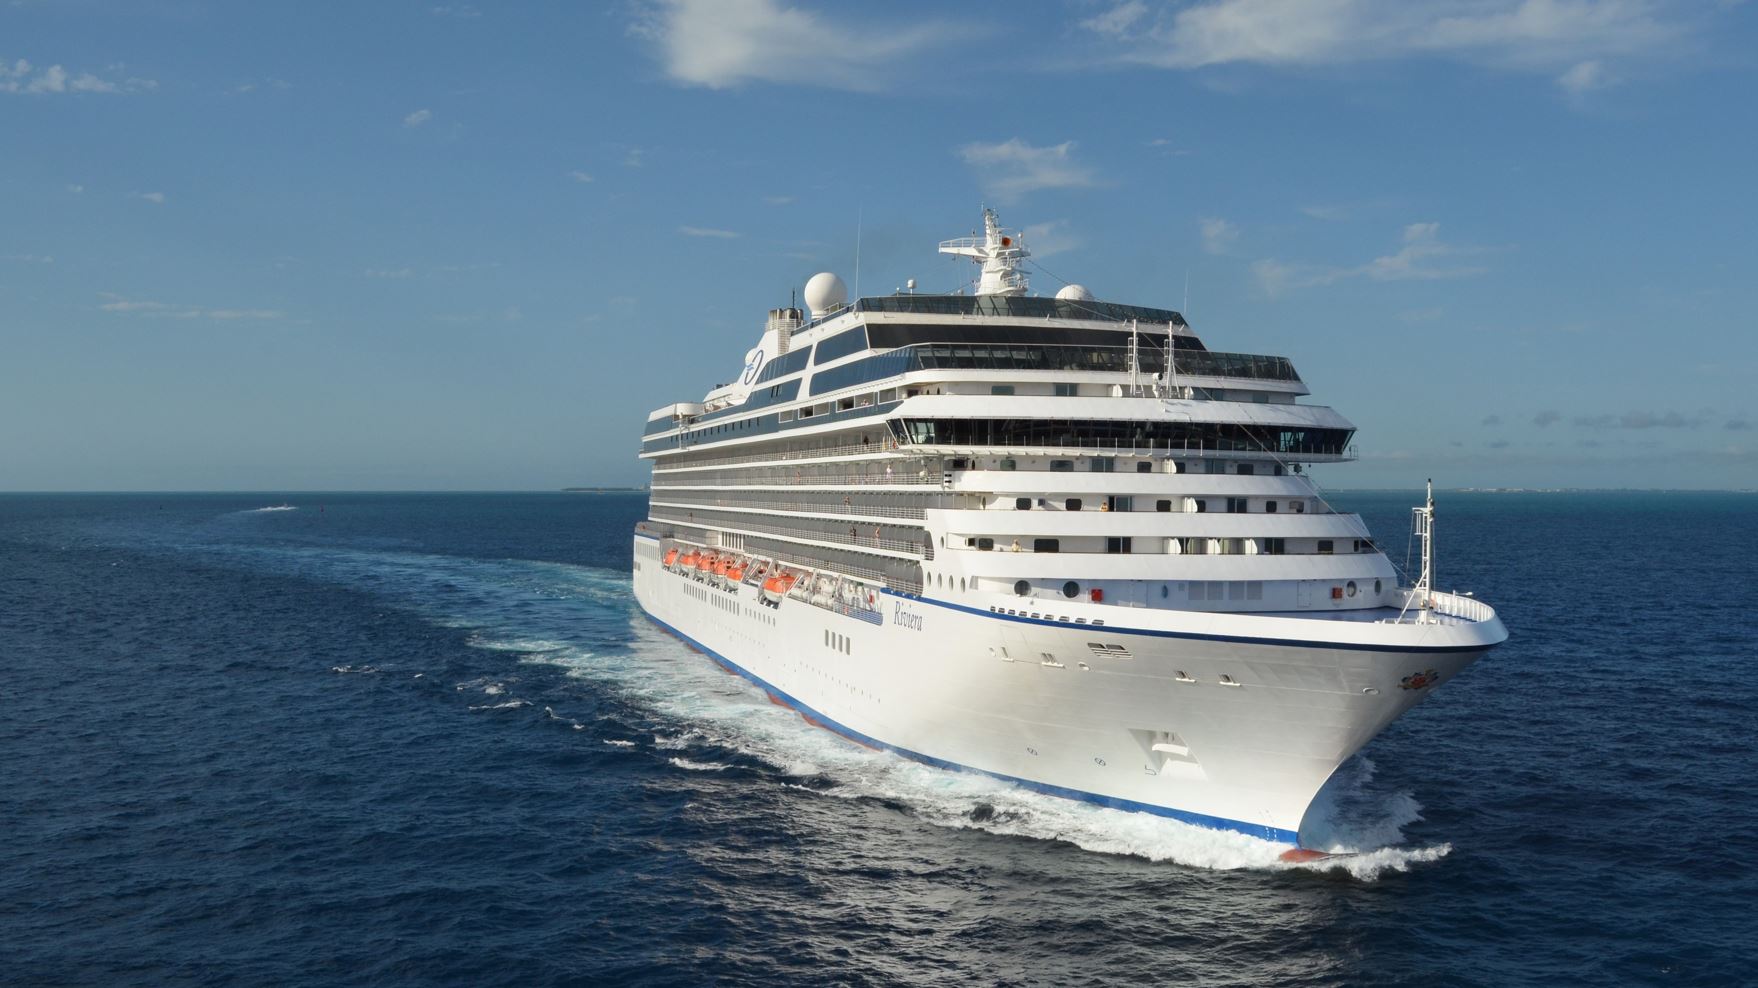 First look at the better-than-new Oceania Riviera – CruiseToTravel